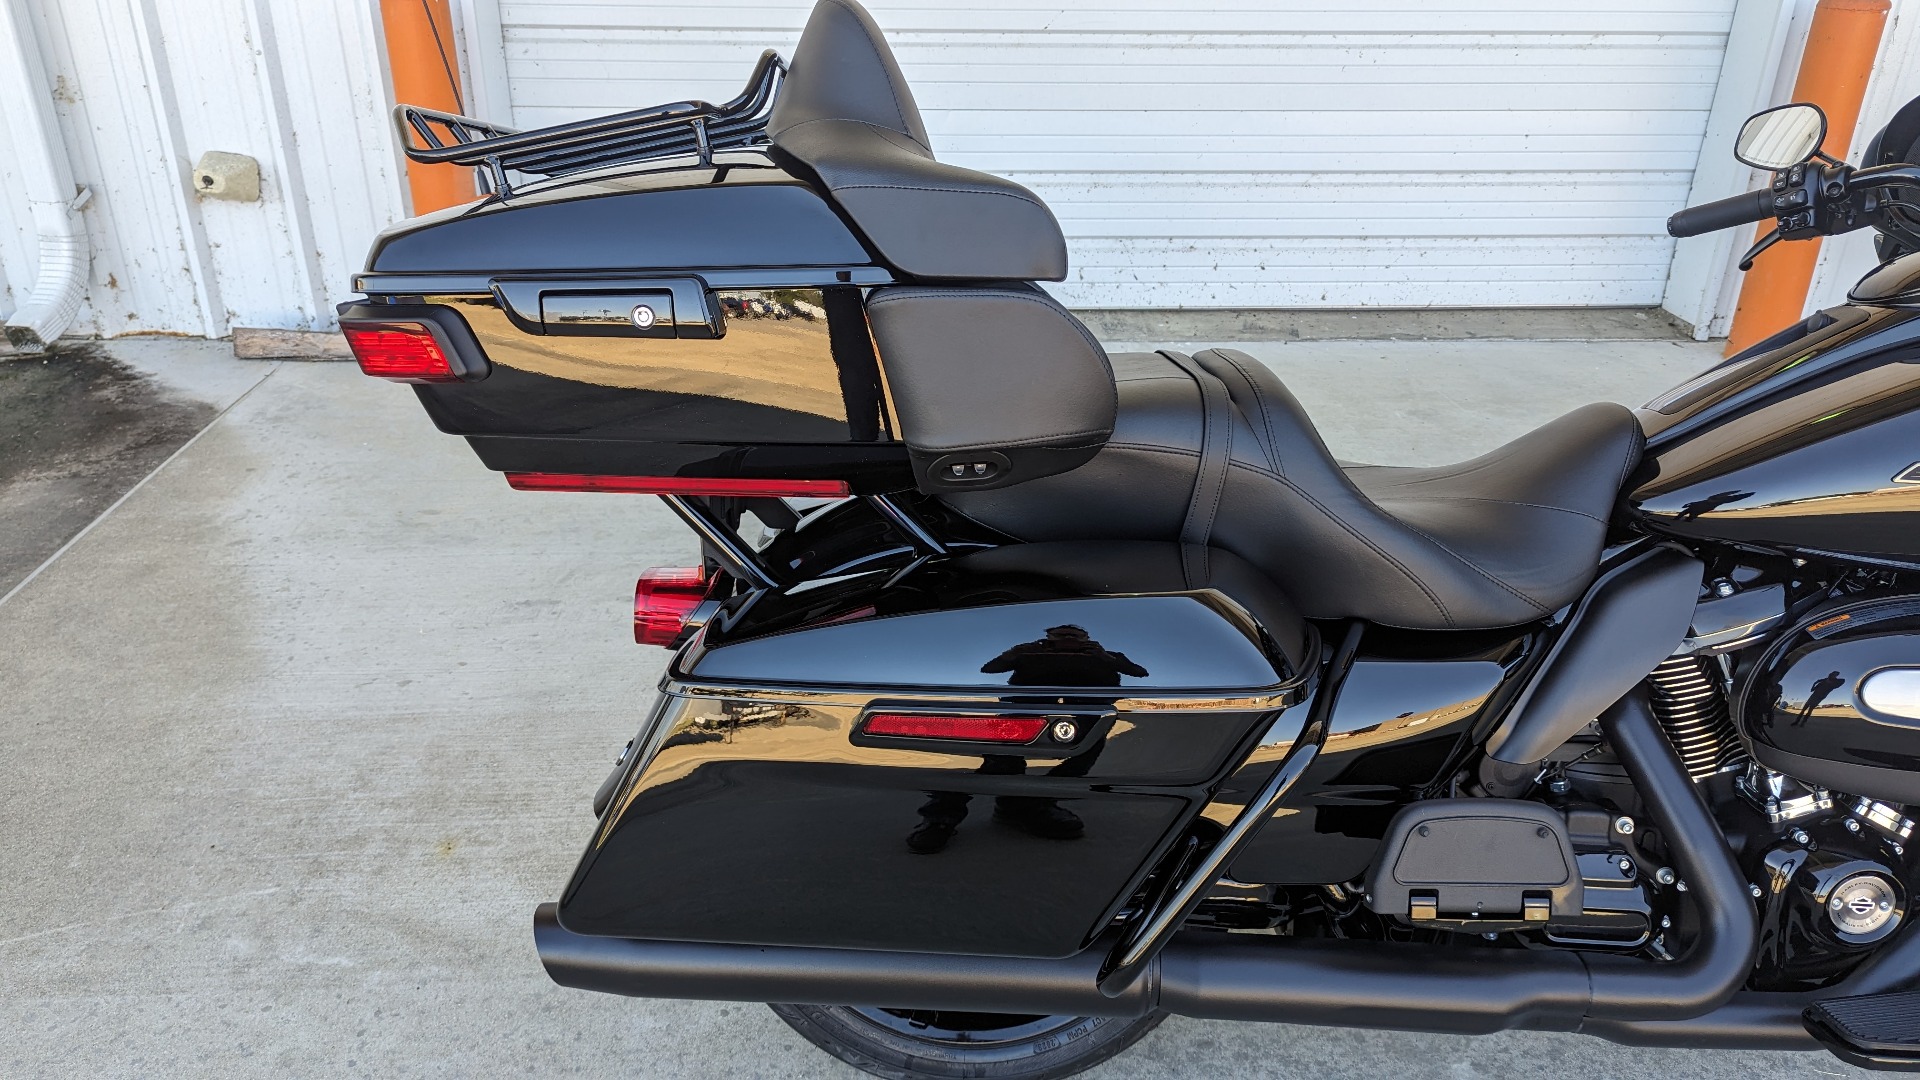 new harley davidson ultra limited black on black for sale in texas - Photo 4